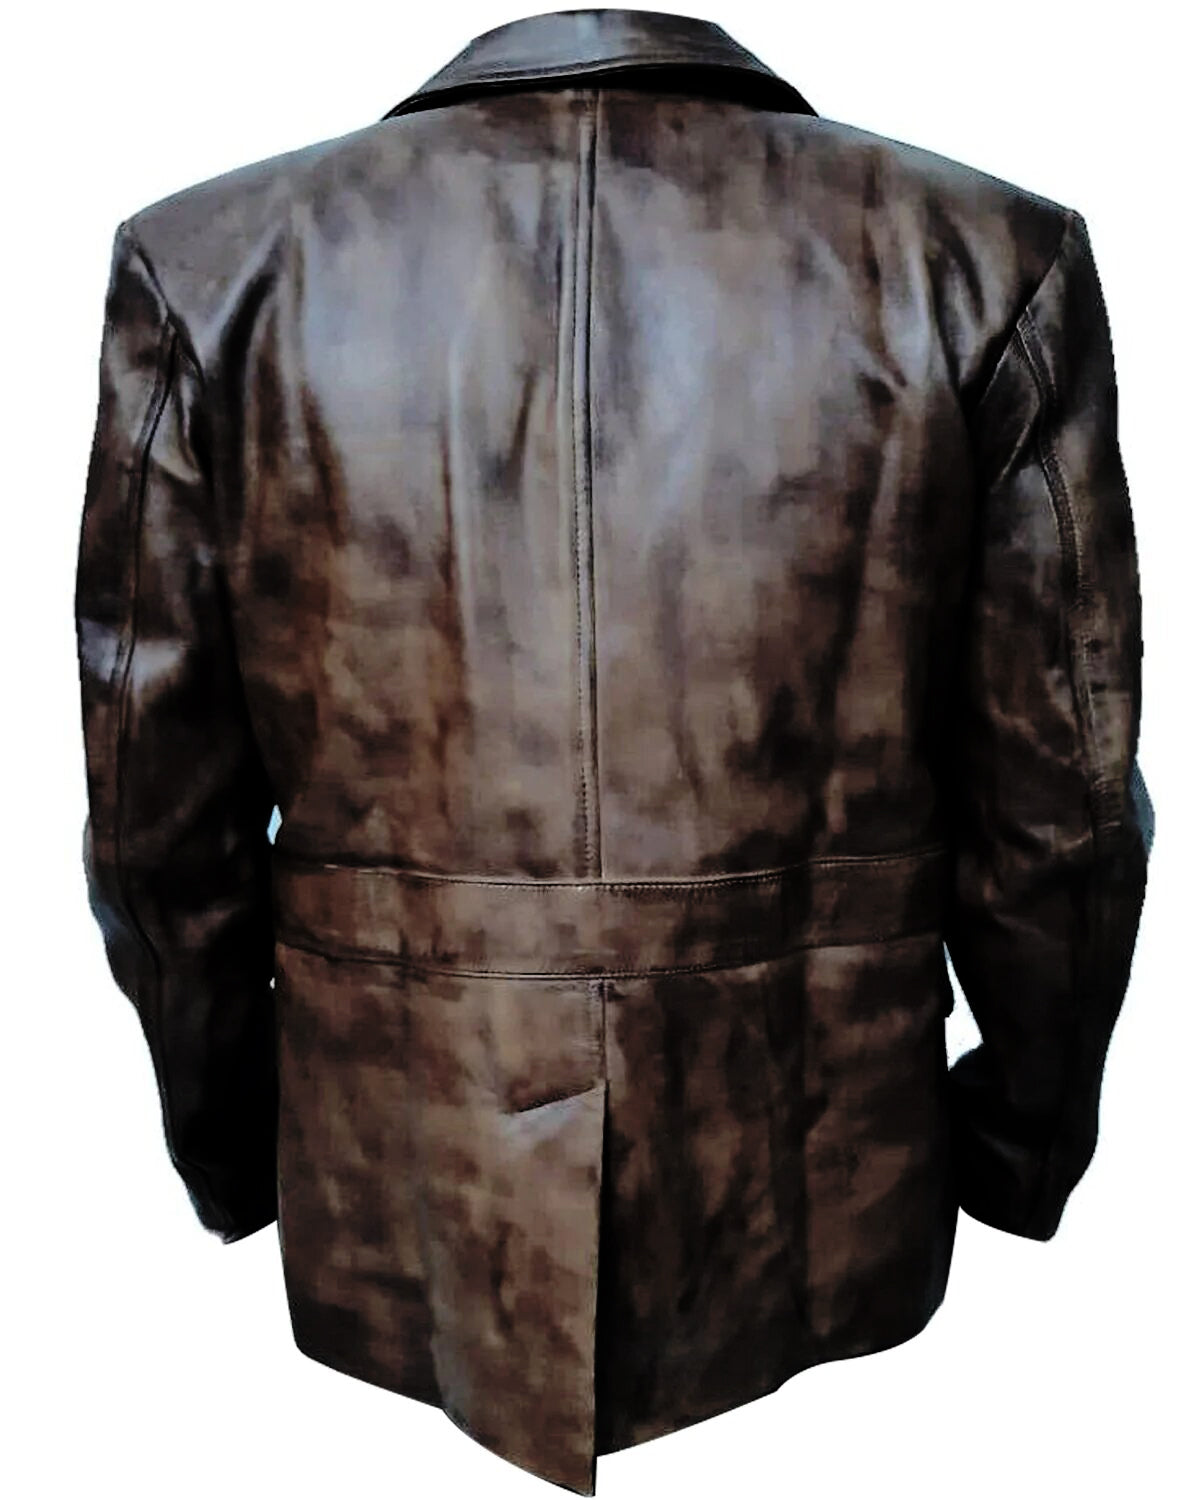 Call of Duty Black Ops Russell Adler Jacket